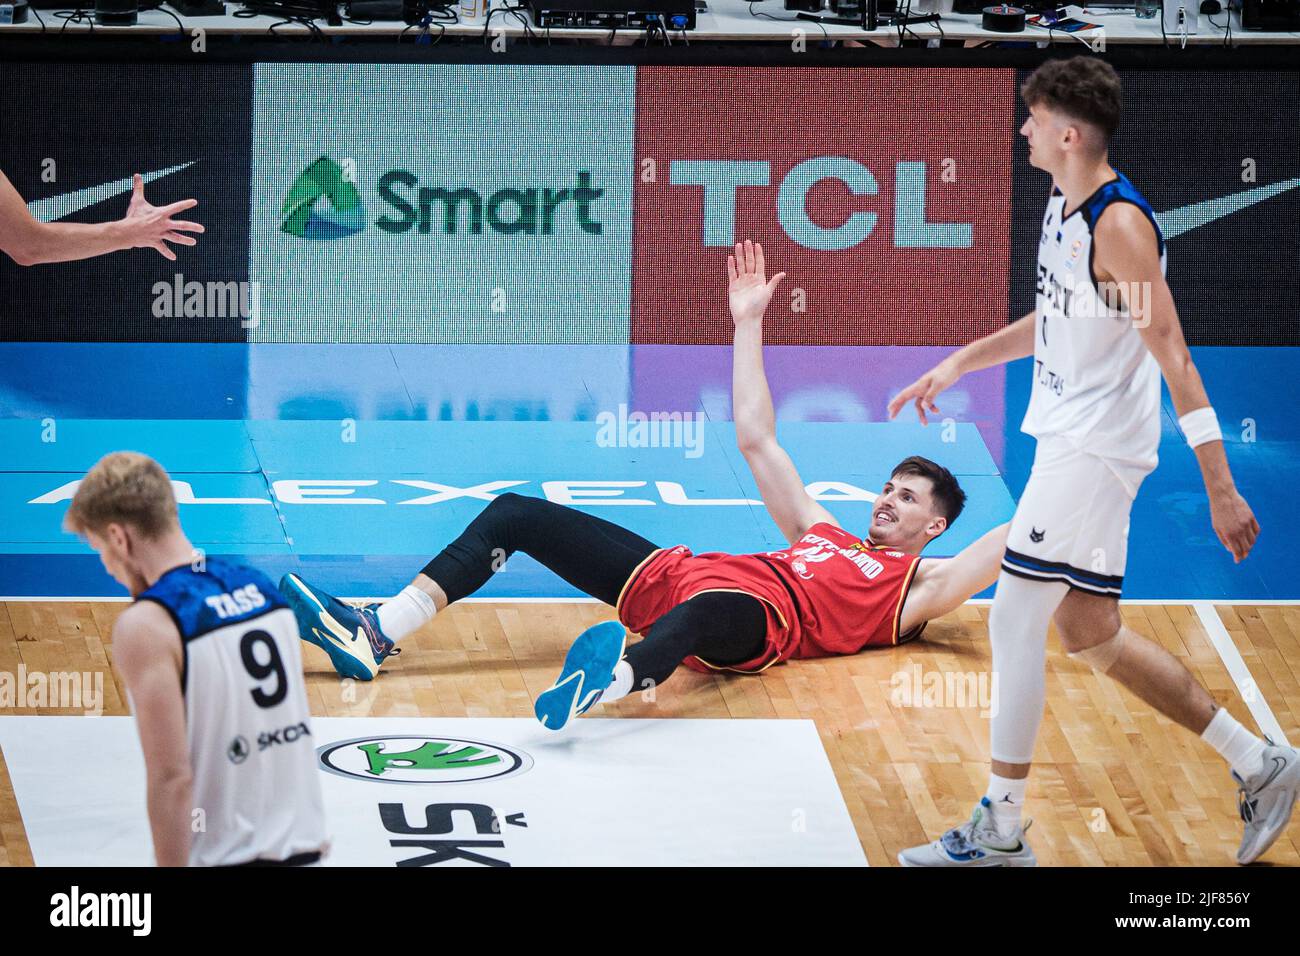 Tallinn, Estonia. 30th June, 2022. Basketball: World Cup qualifying, Estonia - Germany, Europe, 1st round, Group D, Matchday 5. David Kramer from Germany in action. Credit: Hendrik Osula/dpa/Alamy Live News Stock Photo